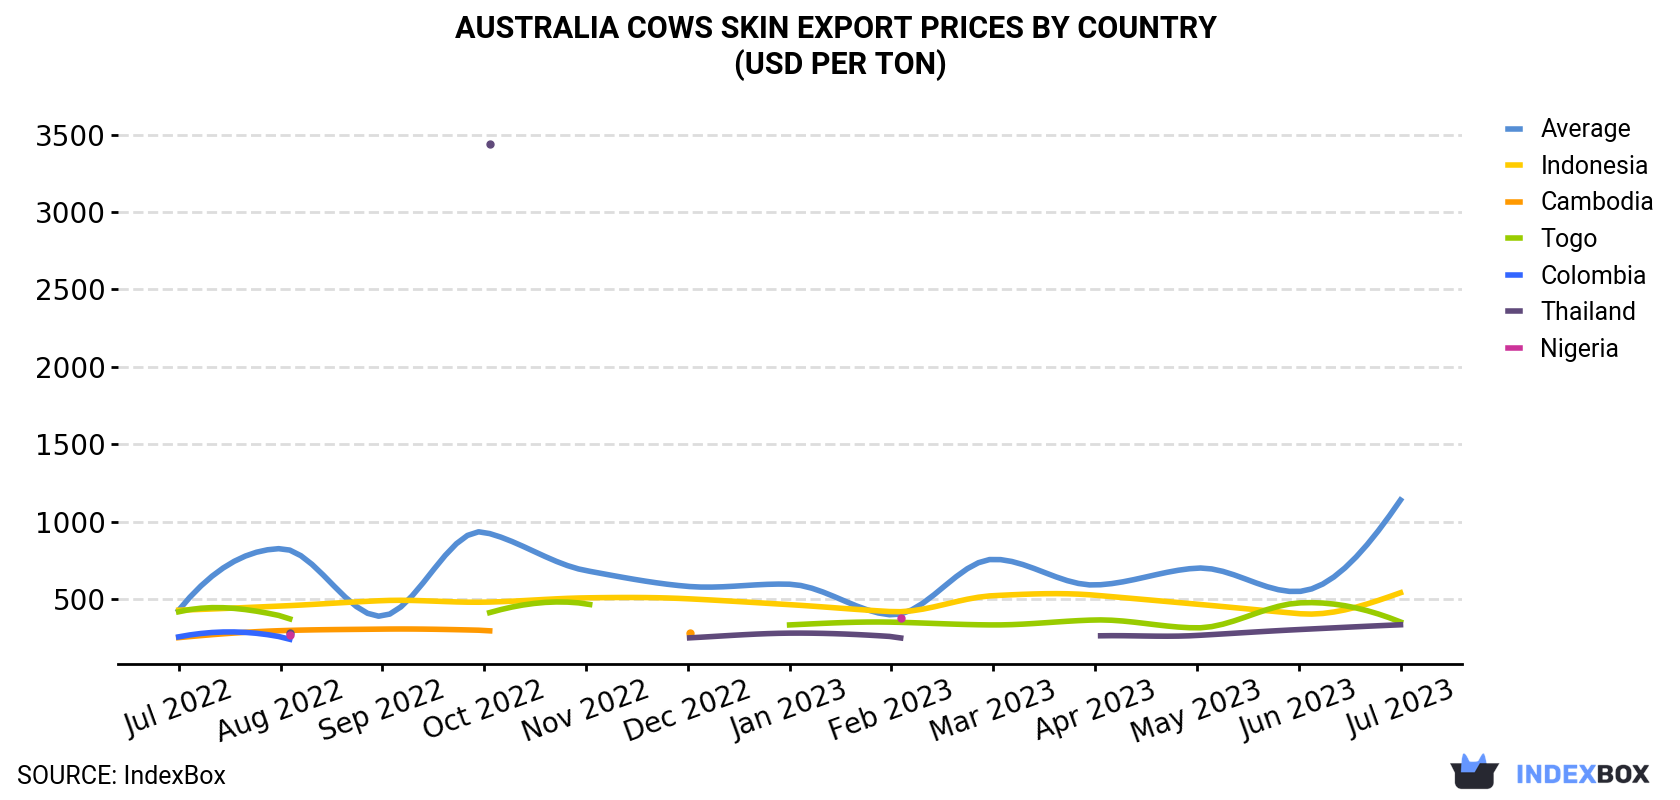 Australia Cows Skin Export Prices By Country (USD Per Ton)